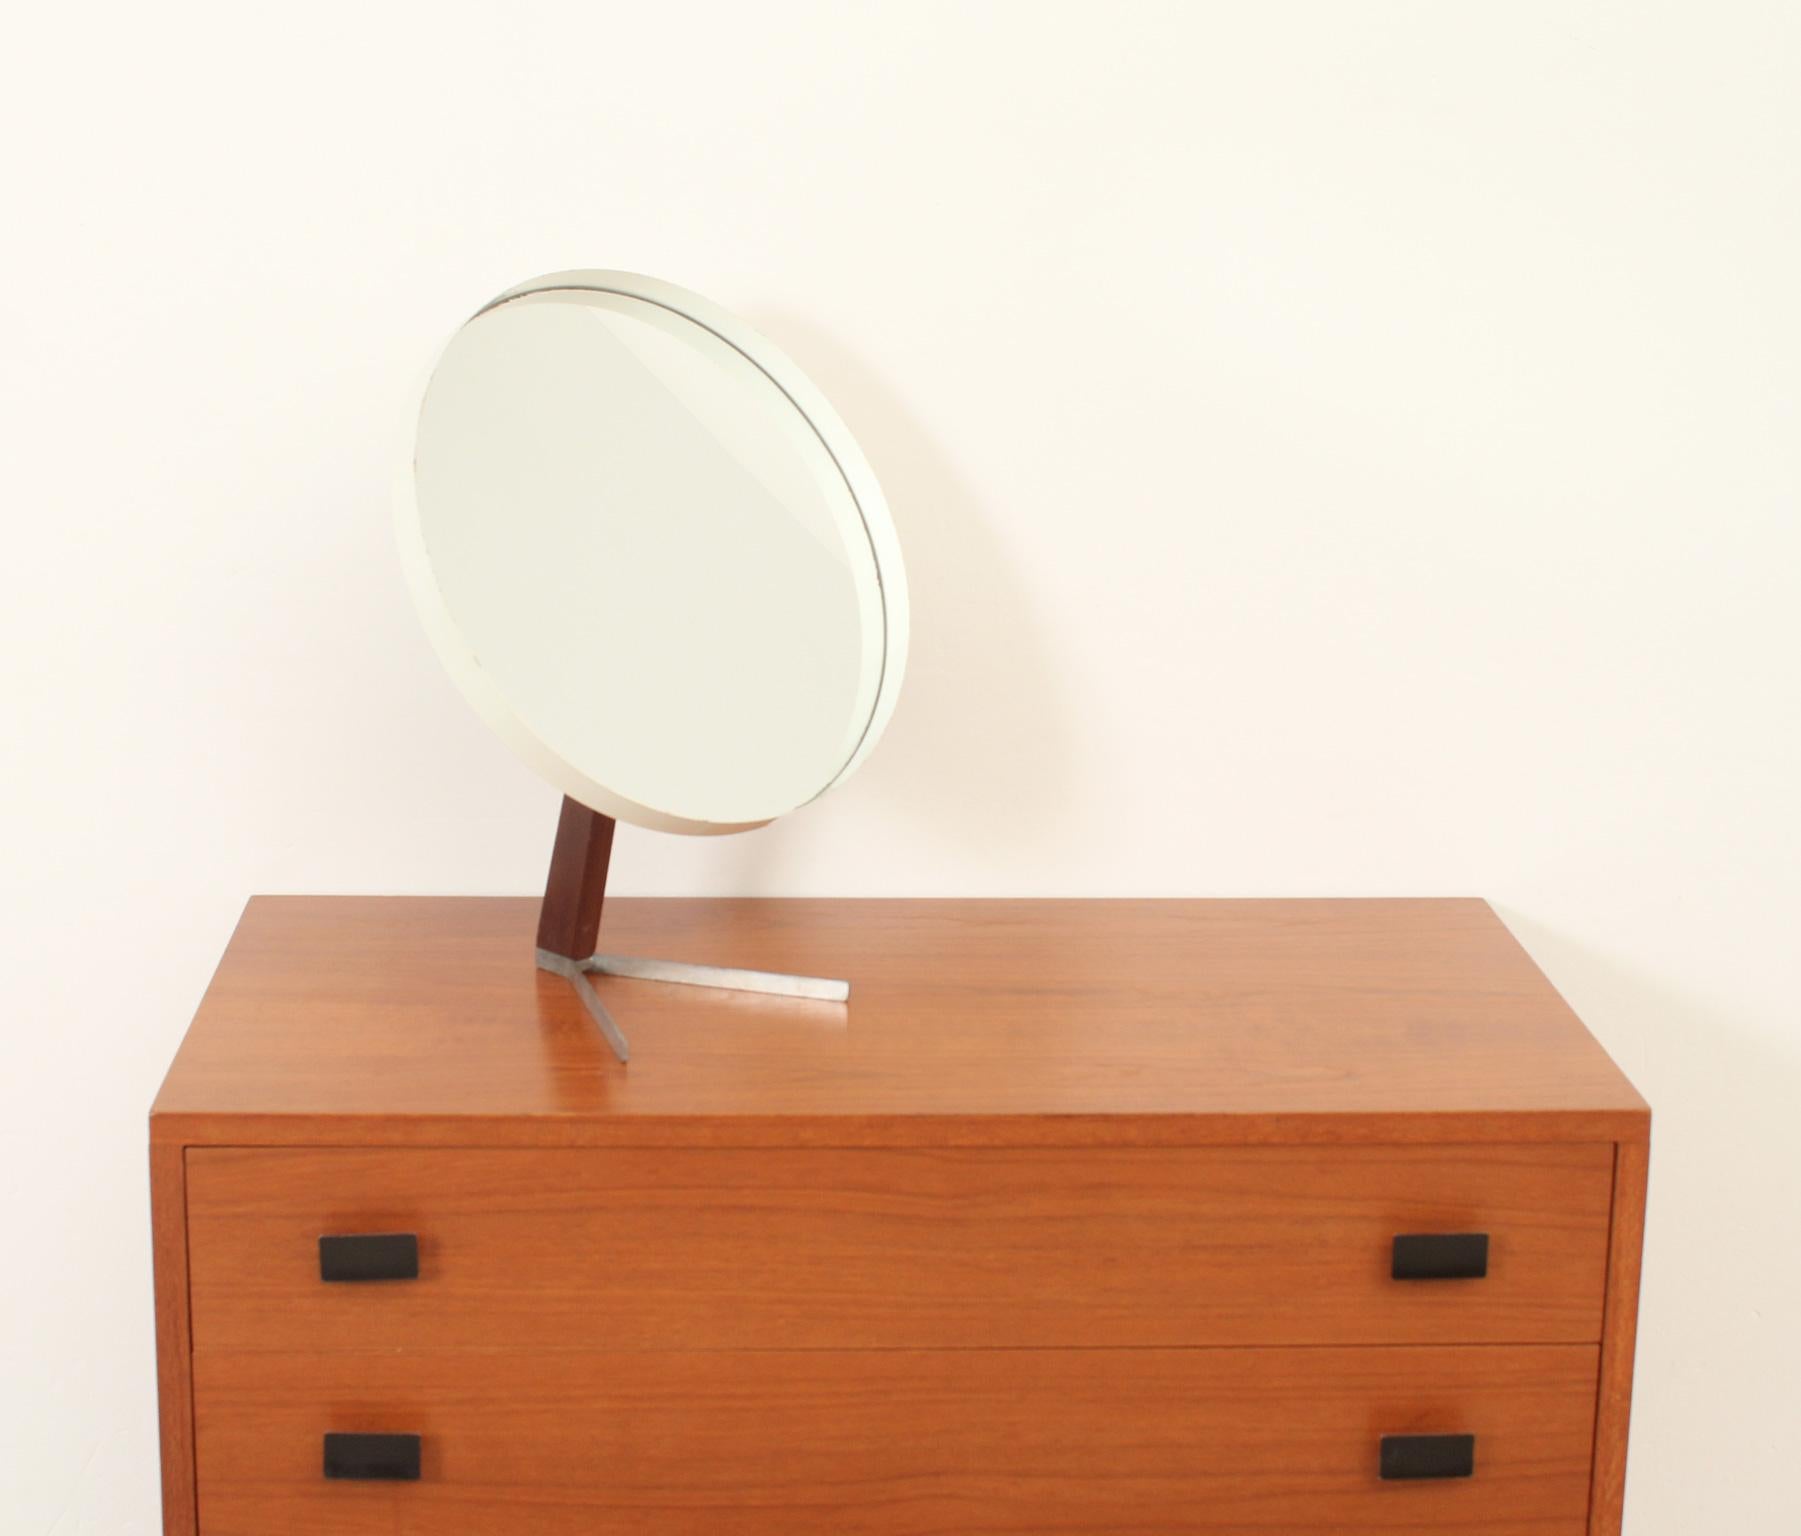 Metal Table Mirror by Robert Welch for Durlston Designs, UK, 1960s